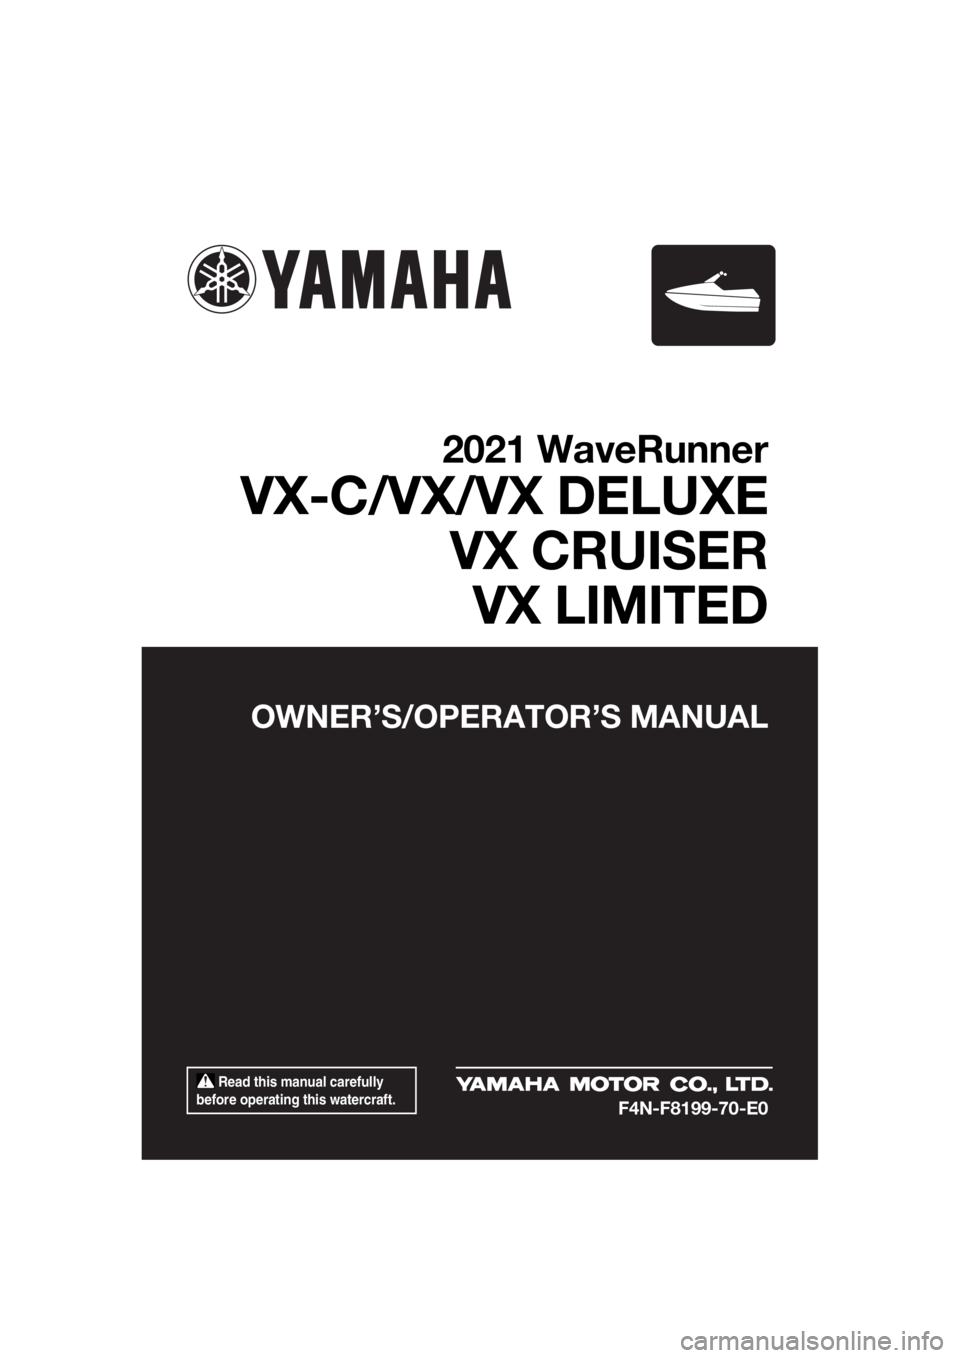 YAMAHA VX CRUISER 2021  Owners Manual  Read this manual carefully 
before operating this watercraft.
OWNER’S/OPERAT OR’S MANUAL
2021 WaveRunner
VX-C/VX/VX DELUXE
VX CRUISERVX LIMITED
F4N-F8199-70-E0
UF4N70E0.book  Page 1  Tuesday, Oct